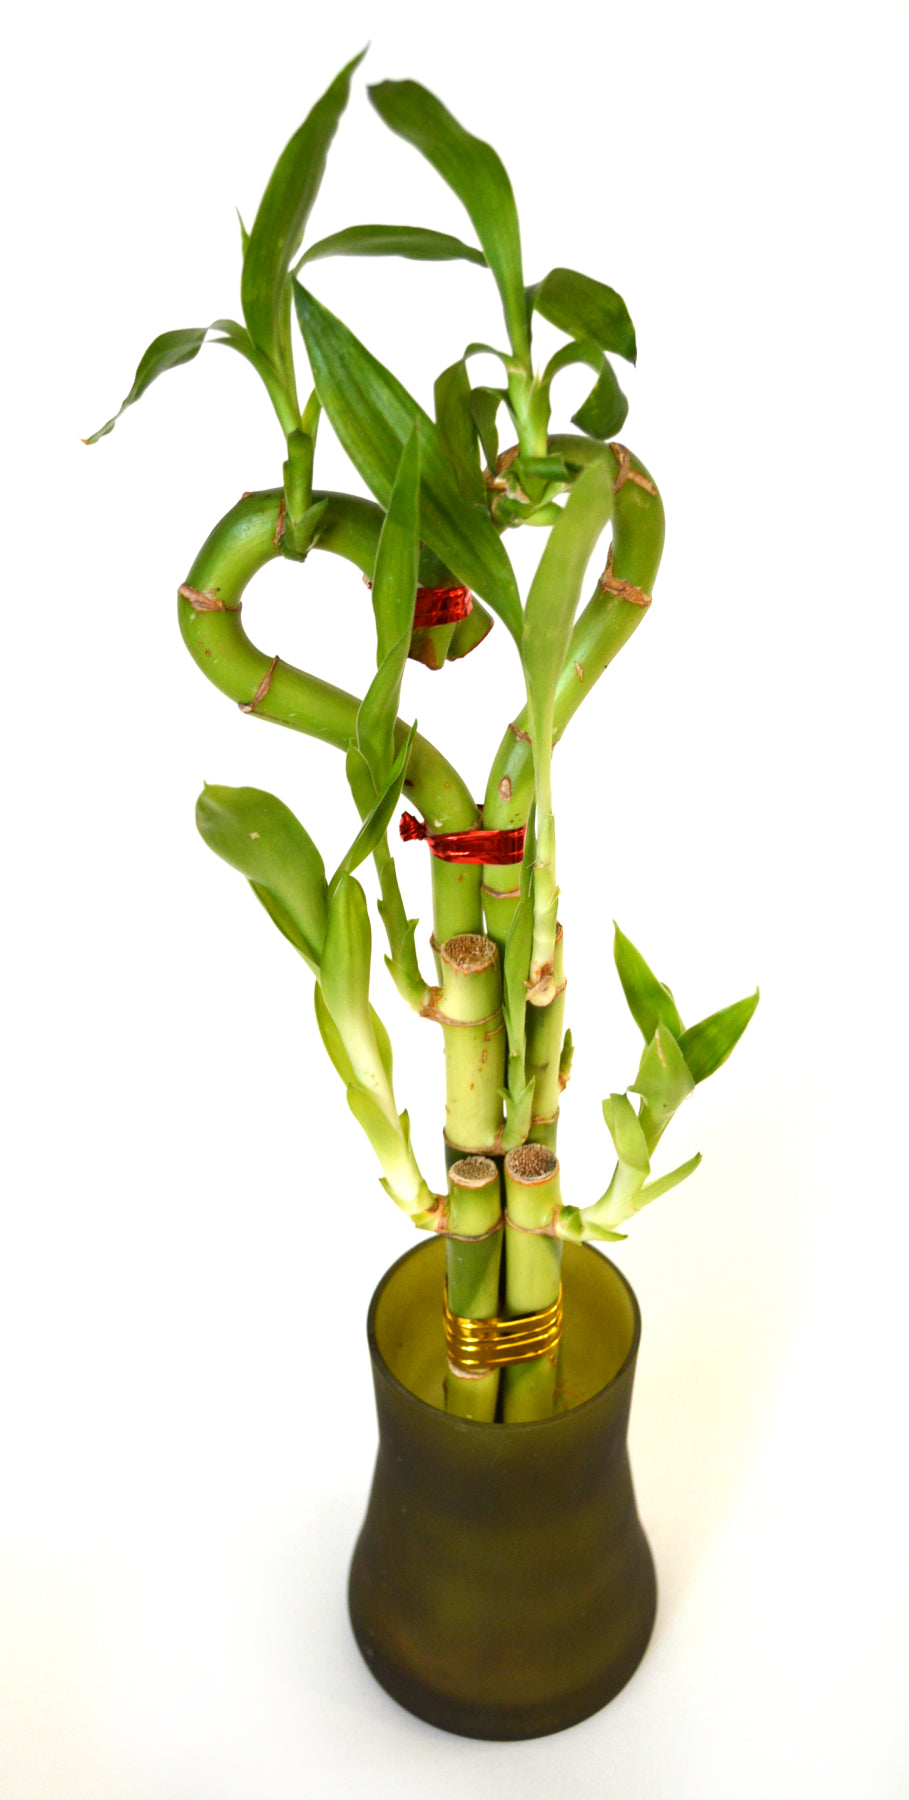 9GreenBox - Lucky Bamboo Heart Style with Tall Glass Vase - 9GreenBox